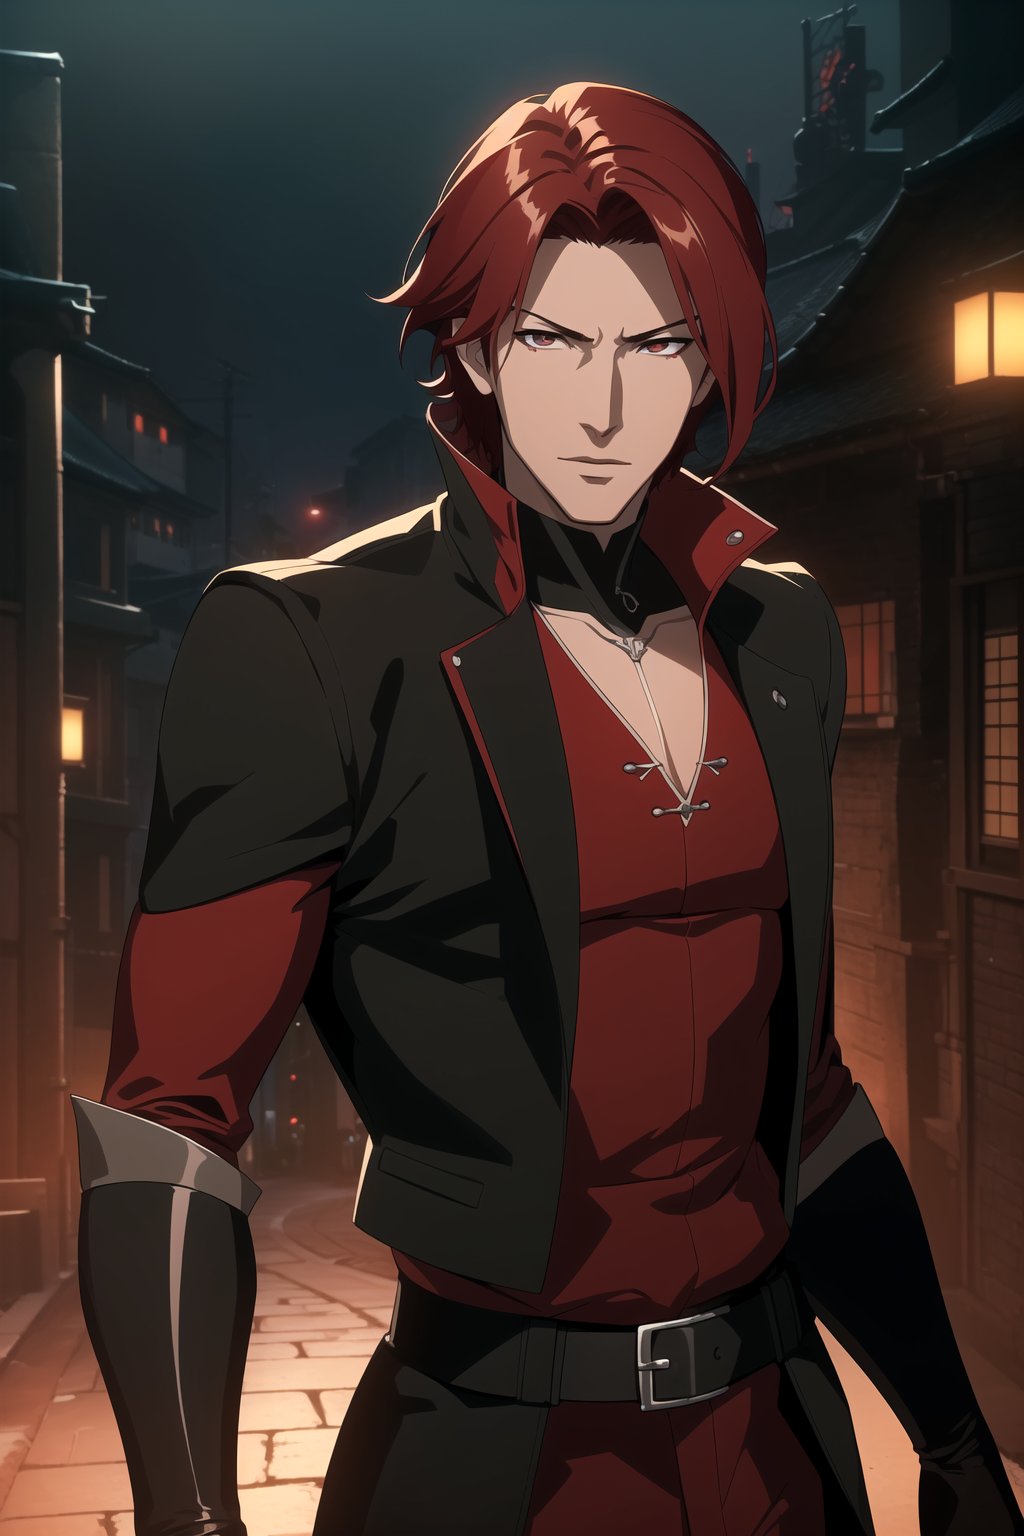 (Masterpiece, Best Quality), (A Skillful 25-Year-Old Japanese Male Secret Agent), (Wavy Short Crimson Hair:1.4), (Pale Skin), (Dark Brown Eyes), (Wearing Black and Red Sleek Tactical Outfit:1.4), (Modern City Road at Night:1.4), (Dynamic Pose:1.2), Centered, (Half Body Shot:1.4), (From Front Shot:1.4), Insane Details, Intricate Face Detail, Intricate Hand Details, Cinematic Shot and Lighting, Realistic and Vibrant Colors, Sharp Focus, Ultra Detailed, Realistic Images, Depth of Field, Incredibly Realistic Environment and Scene, Master Composition and Cinematography, castlevania style,castlevania style